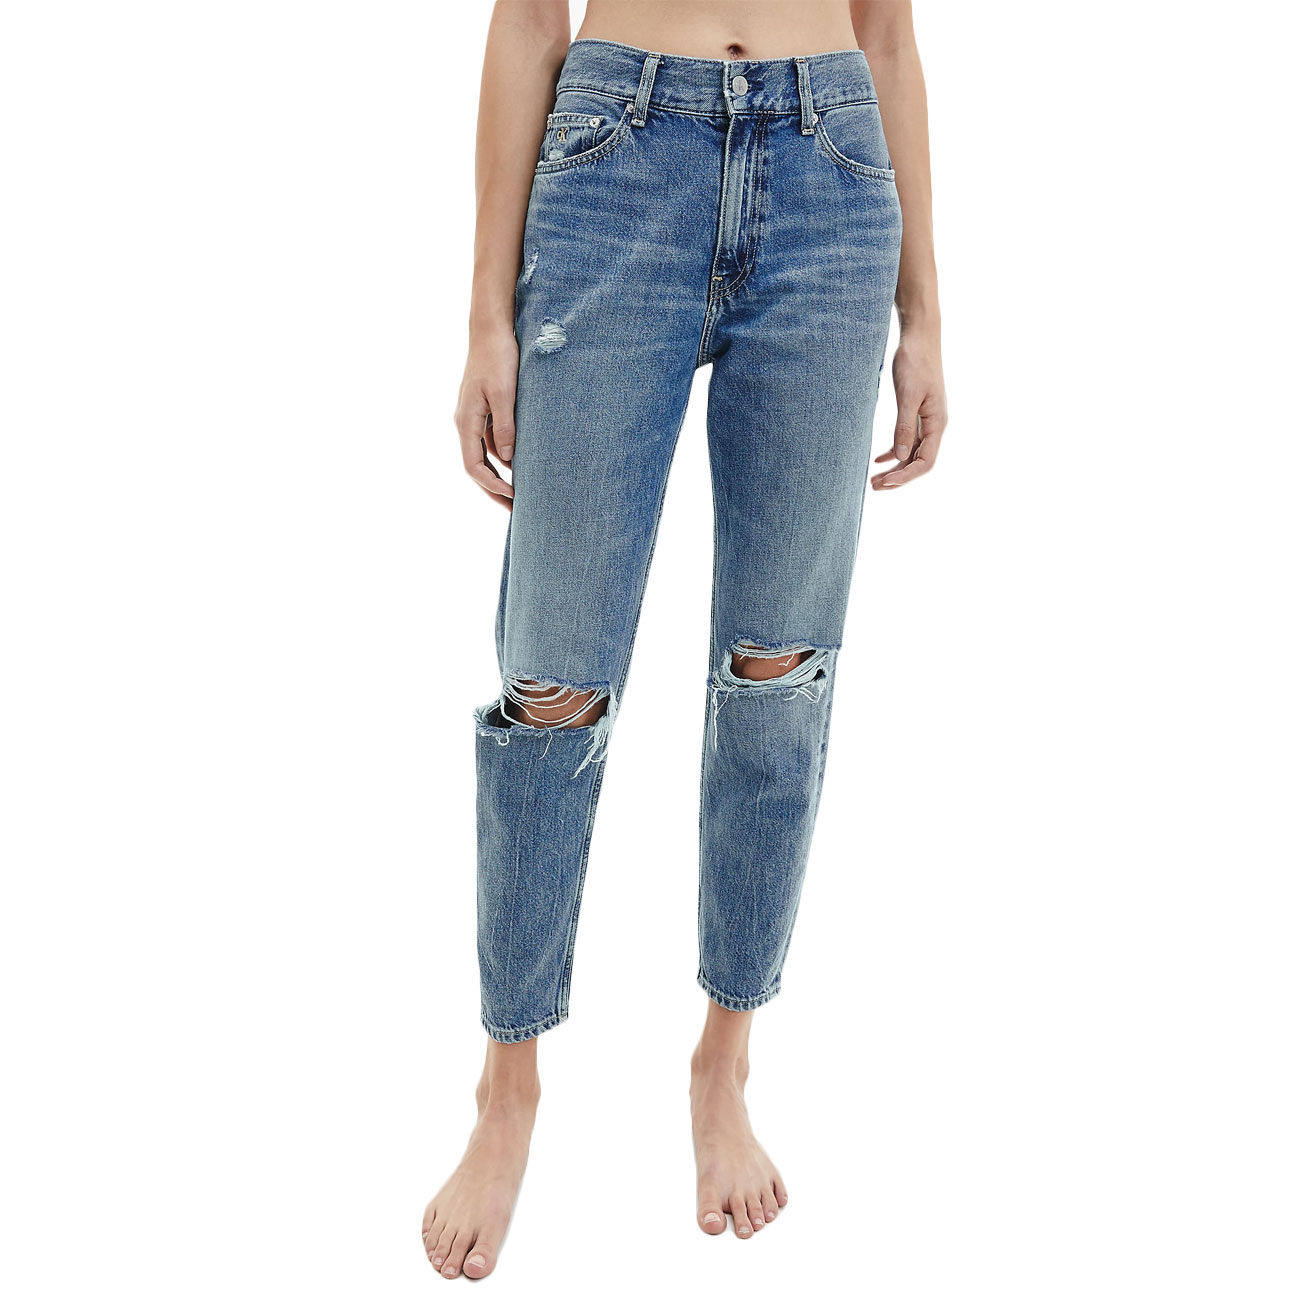 CALVIN KLEIN JEANS HIGH WAIST MOM JEANS WITH RIPS Woman Denim